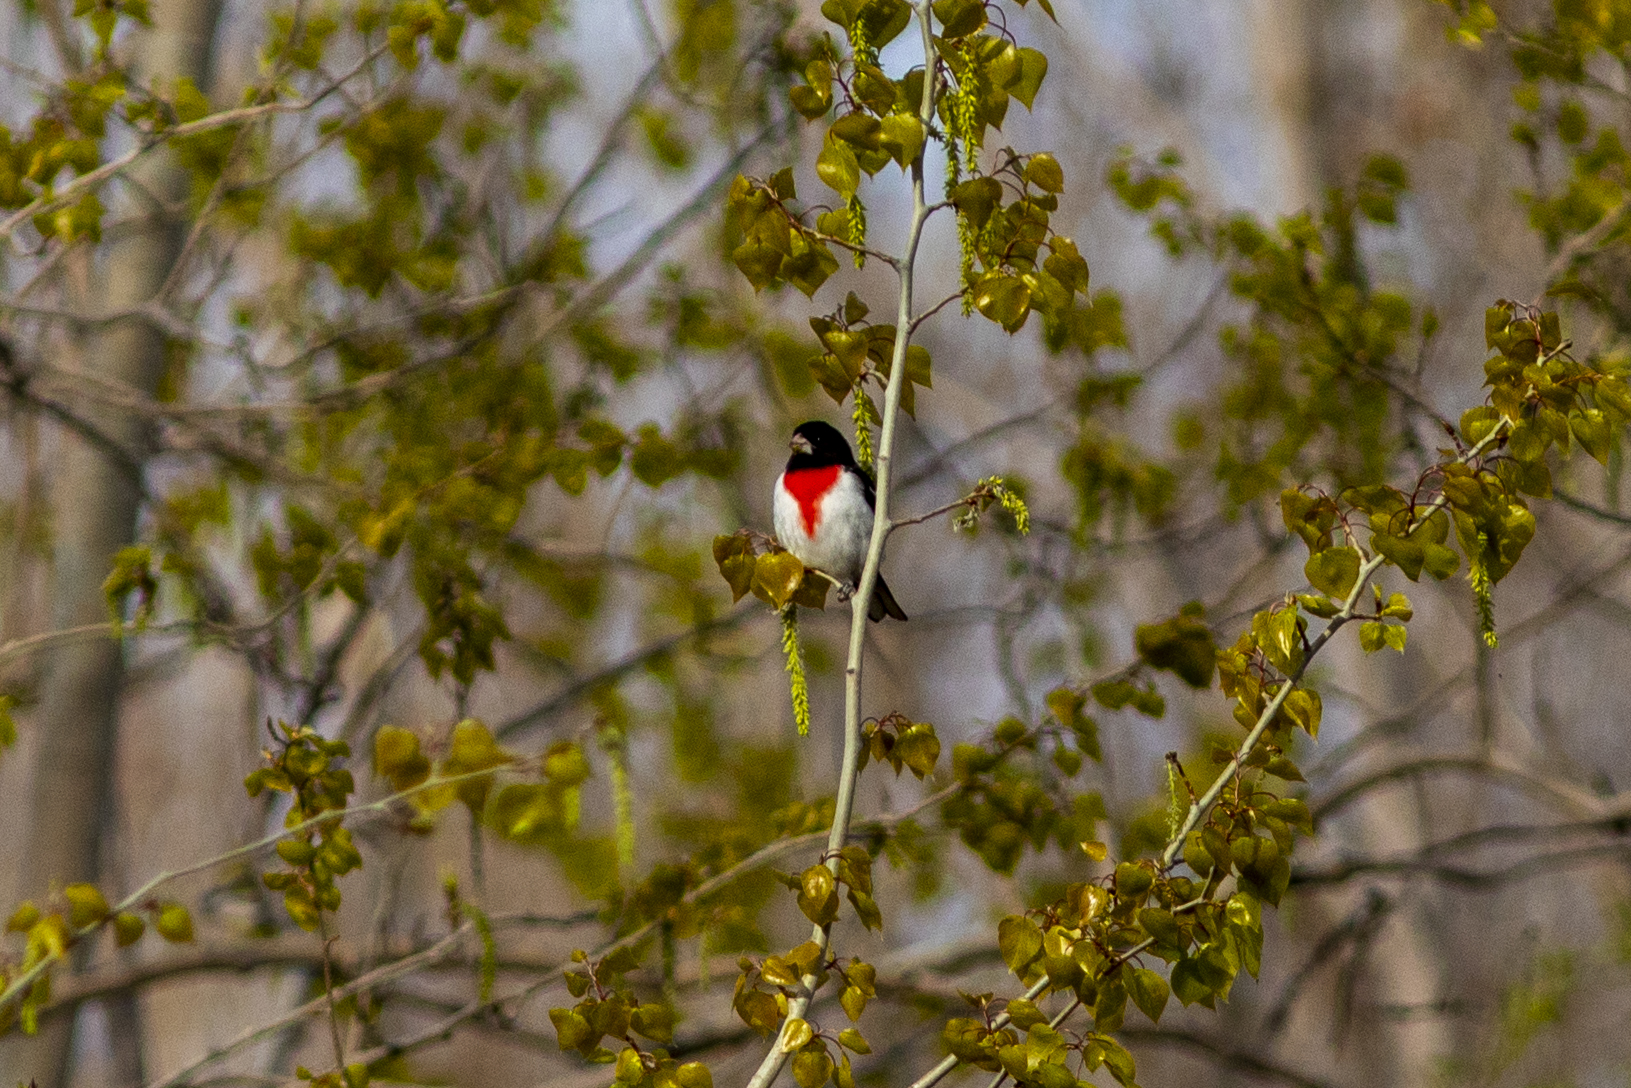 A bird with a black head, white belly and stark red mark on its chest faces the camera, standing on a branch.